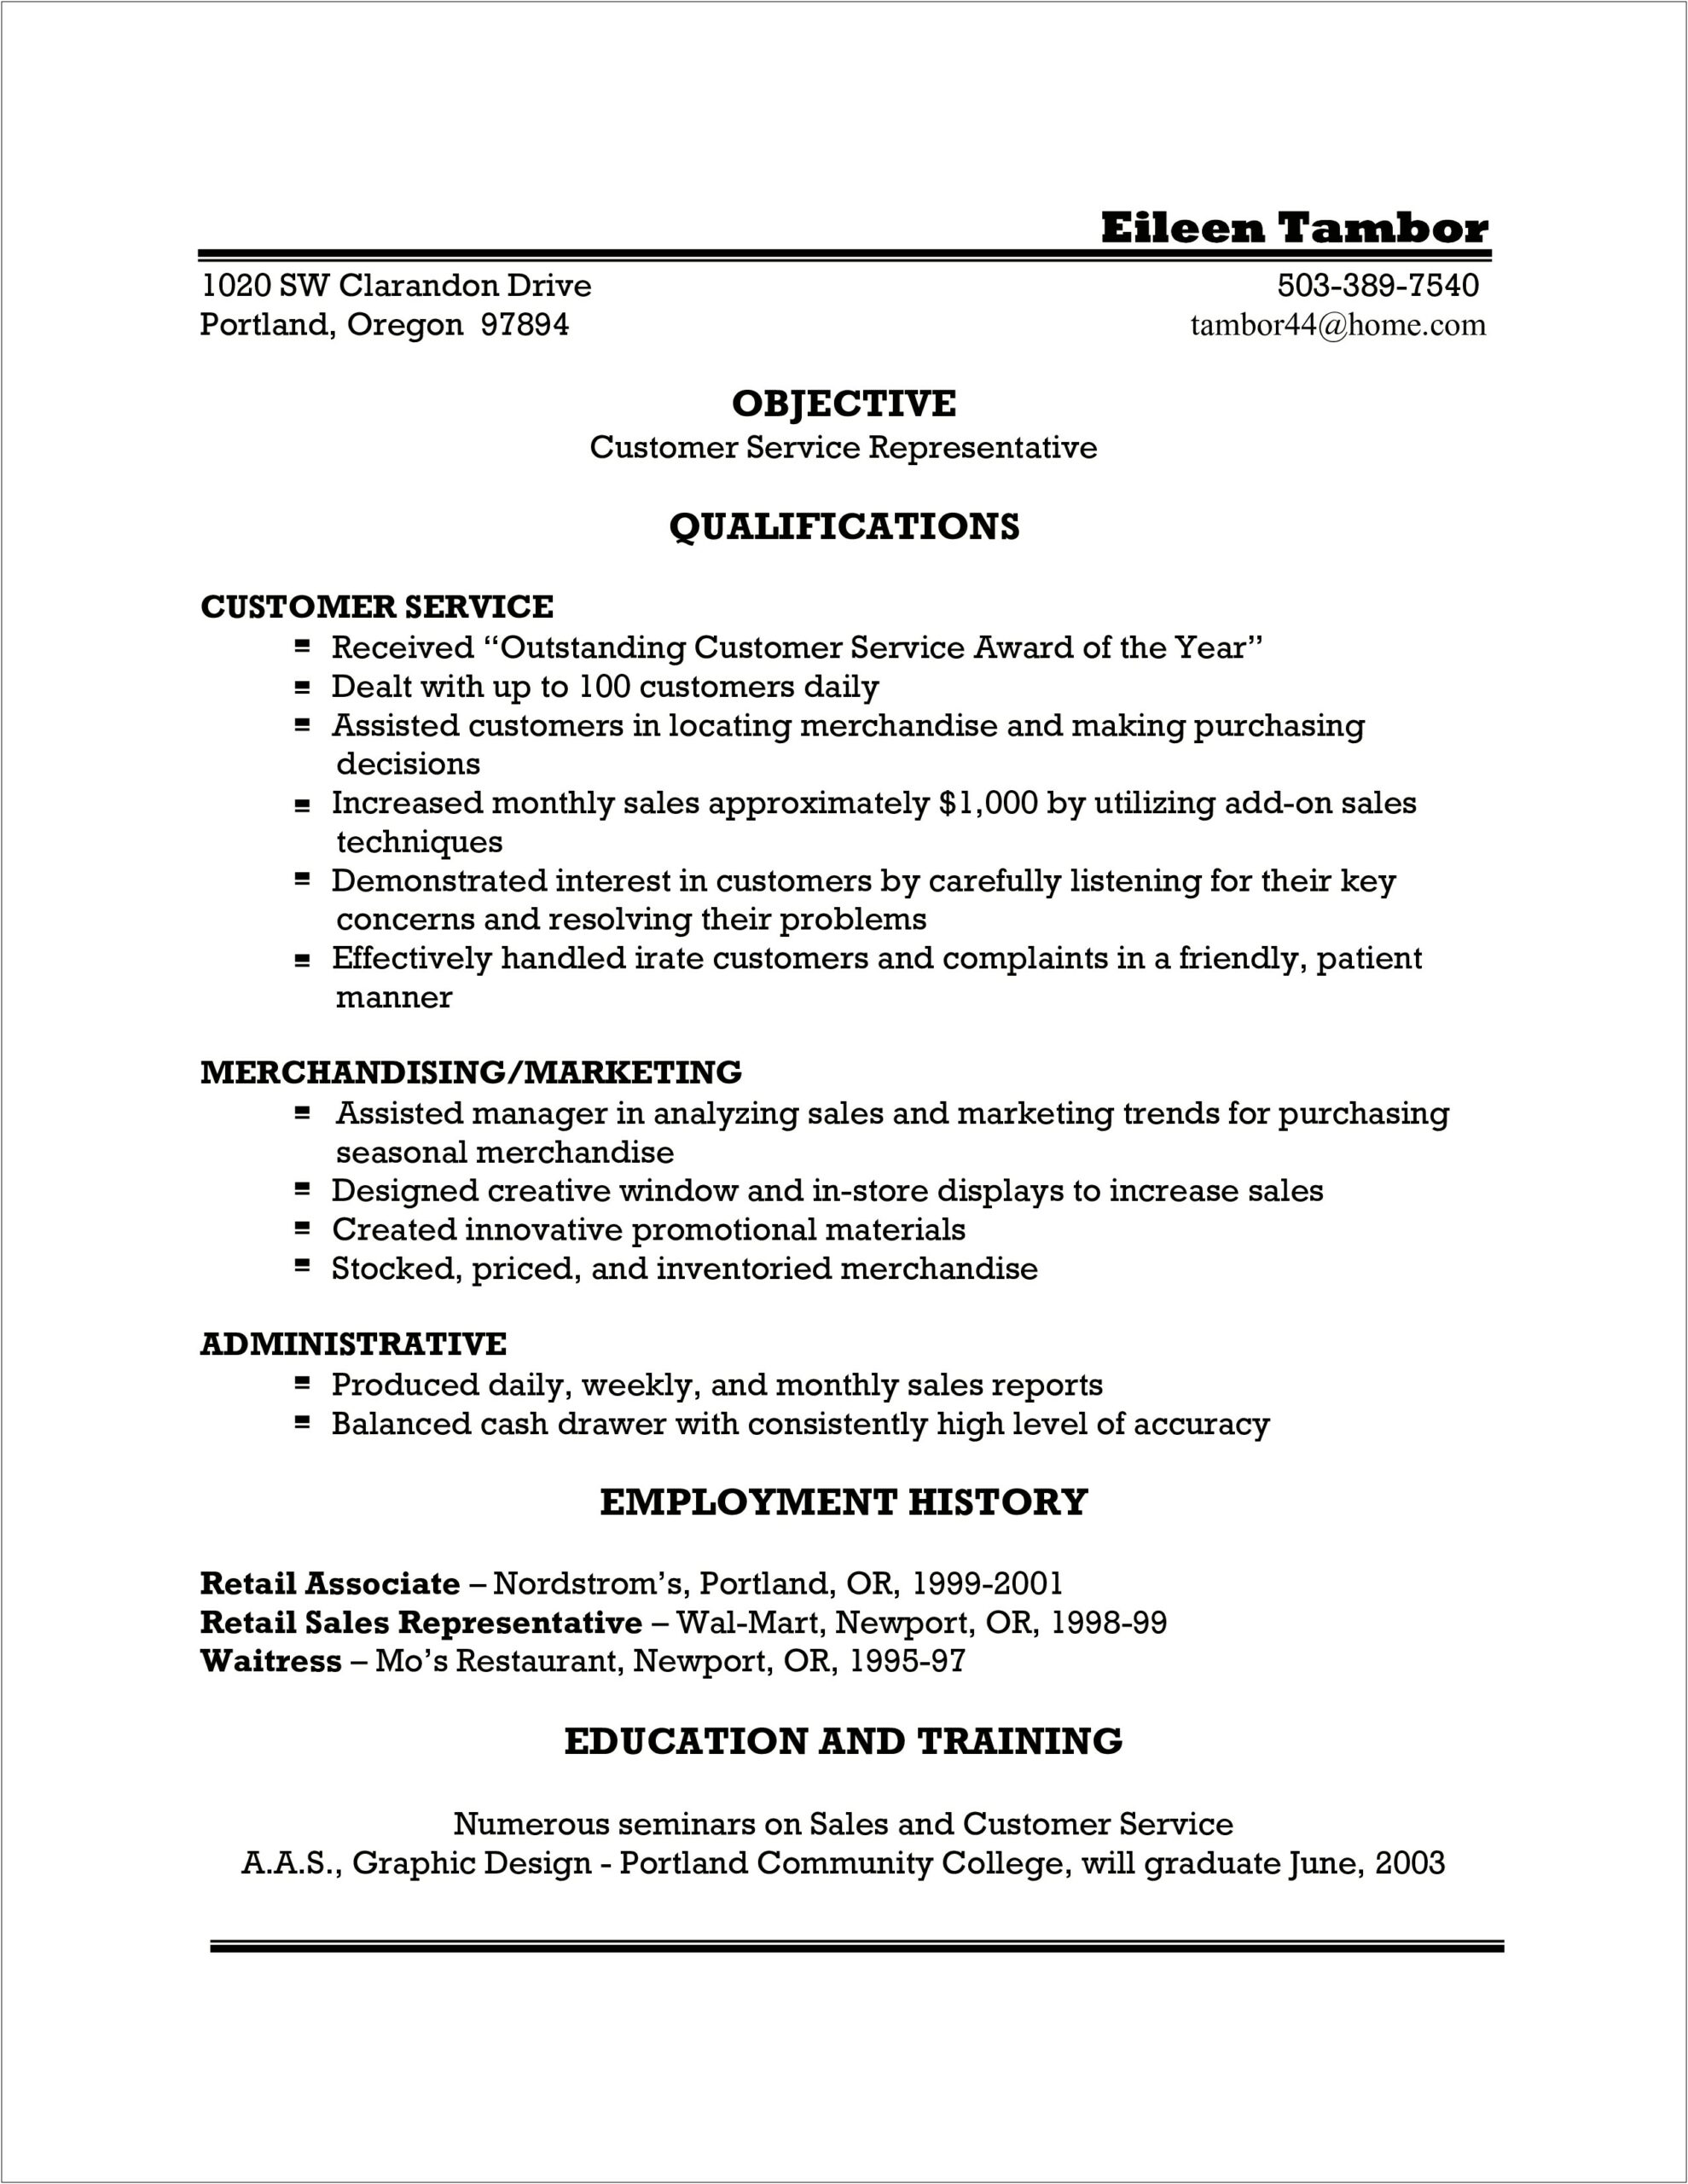 Examples For Resume Objectives In Customer Service